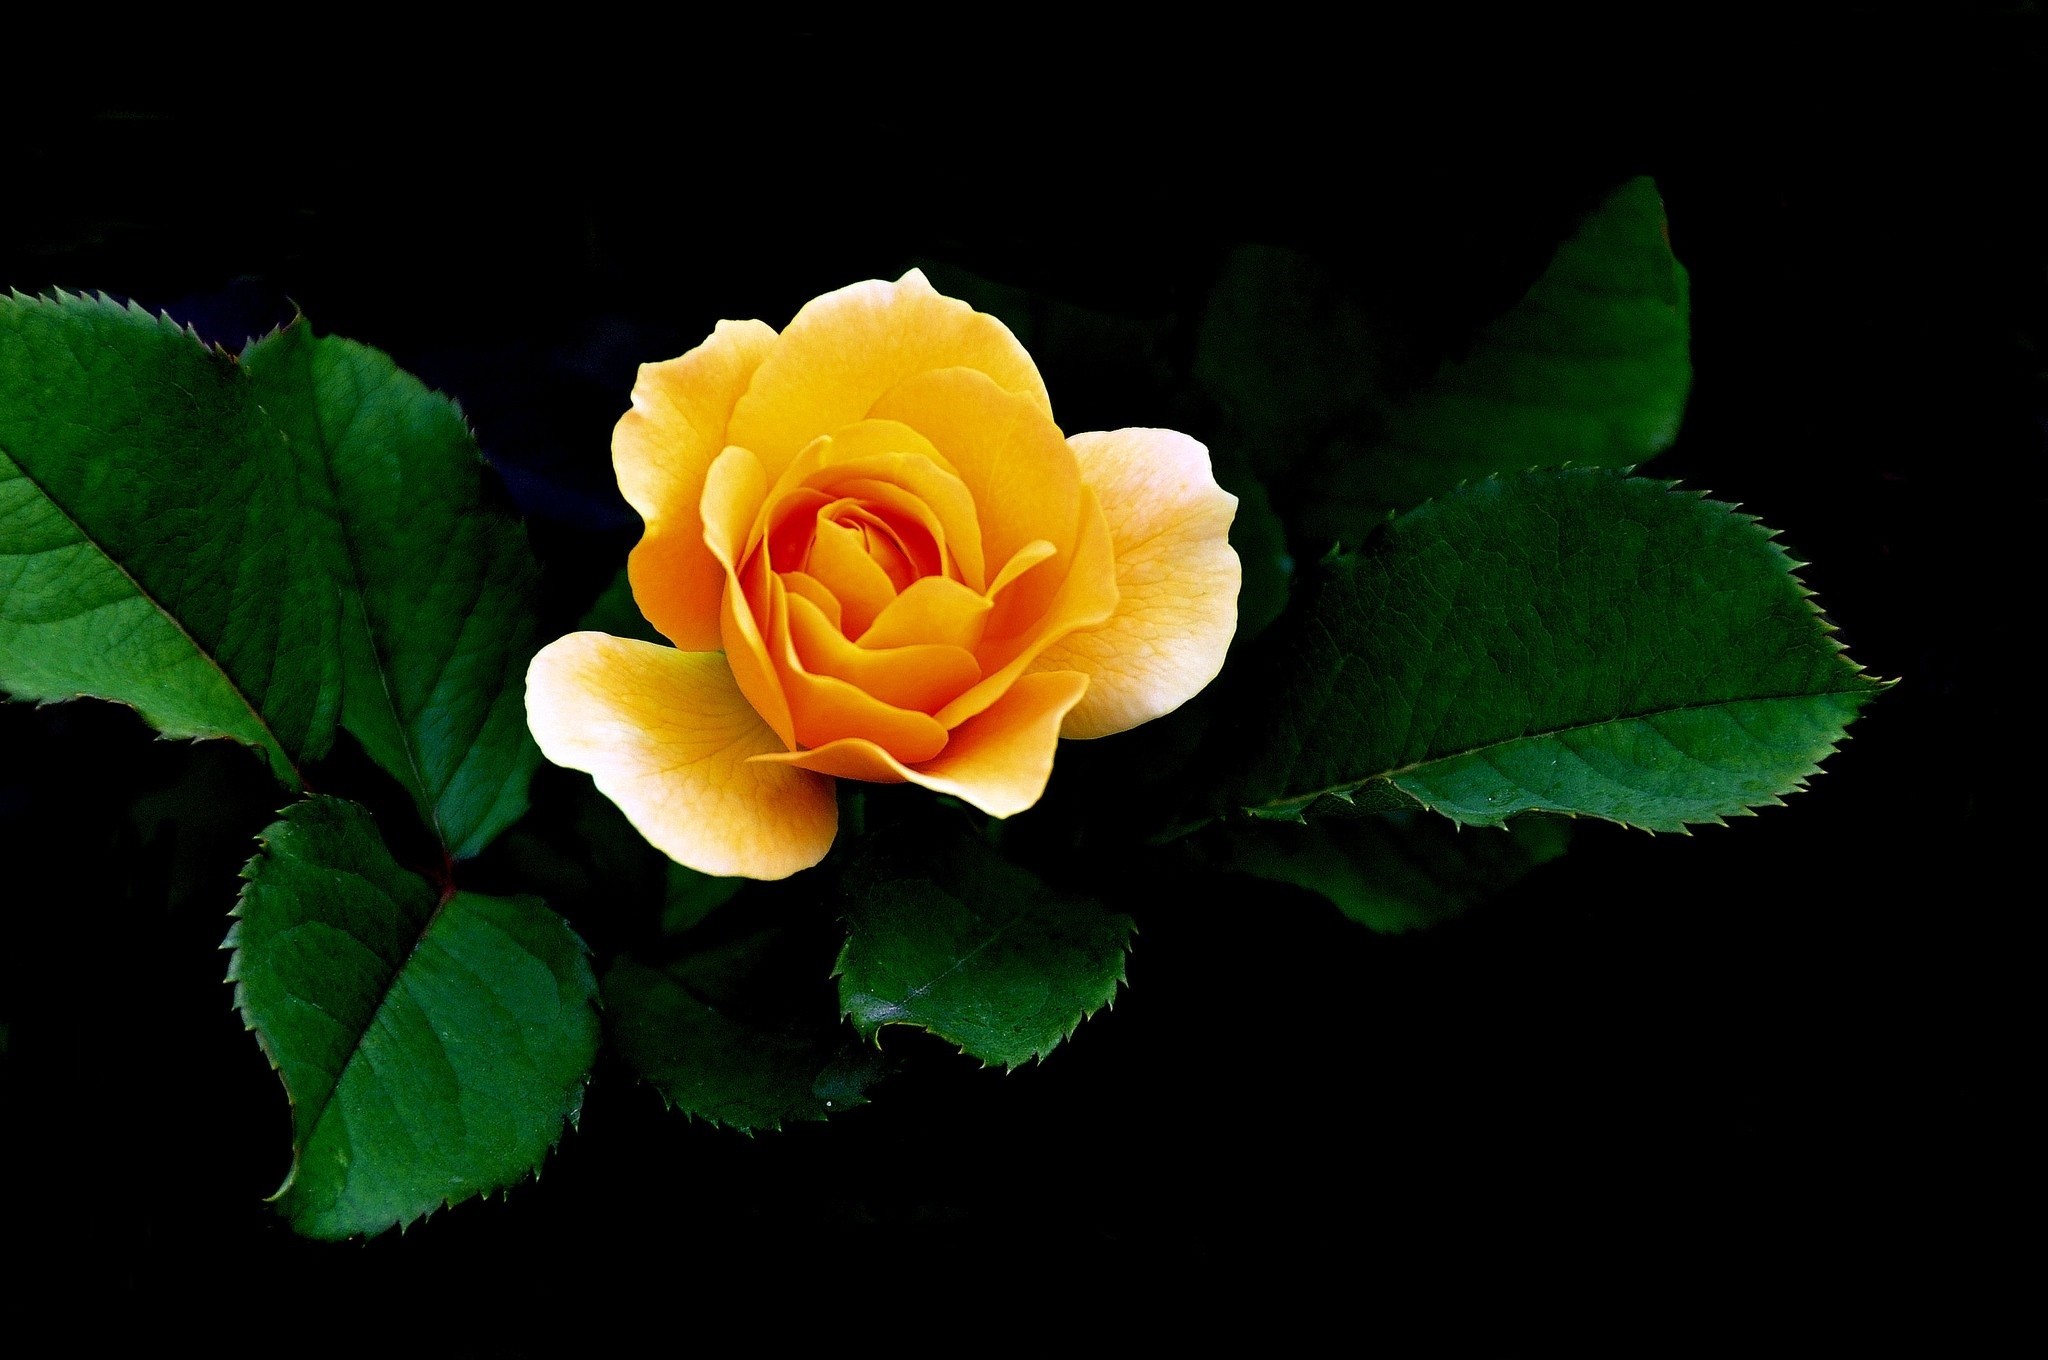 HD desktop wallpaper: Flowers, Rose, Close Up, Leaf, Earth, Yellow Flower  download free picture #382041